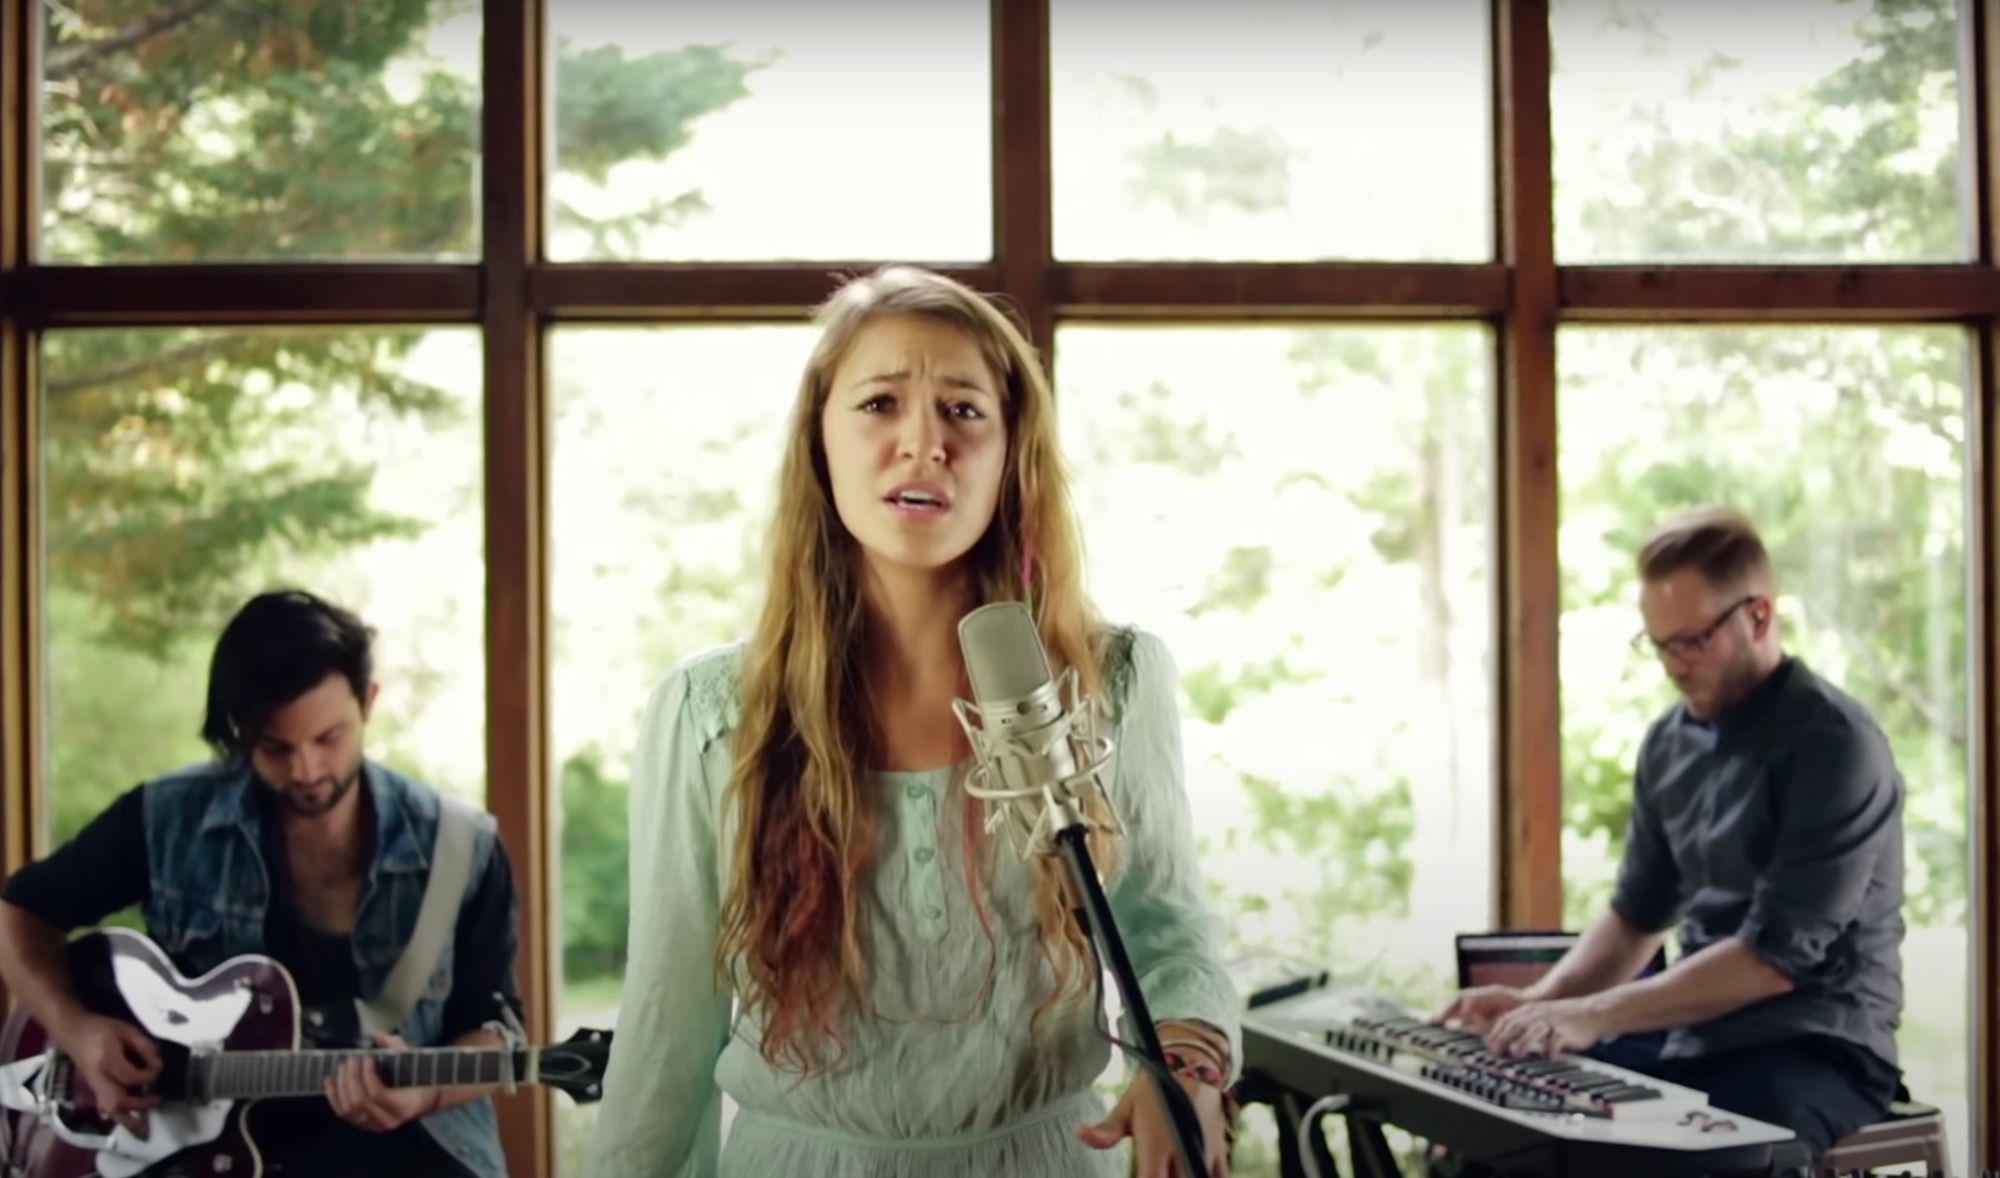 Behold The Holidays Hath Arrived Says This Lauren Daigle Christmas Album 0158